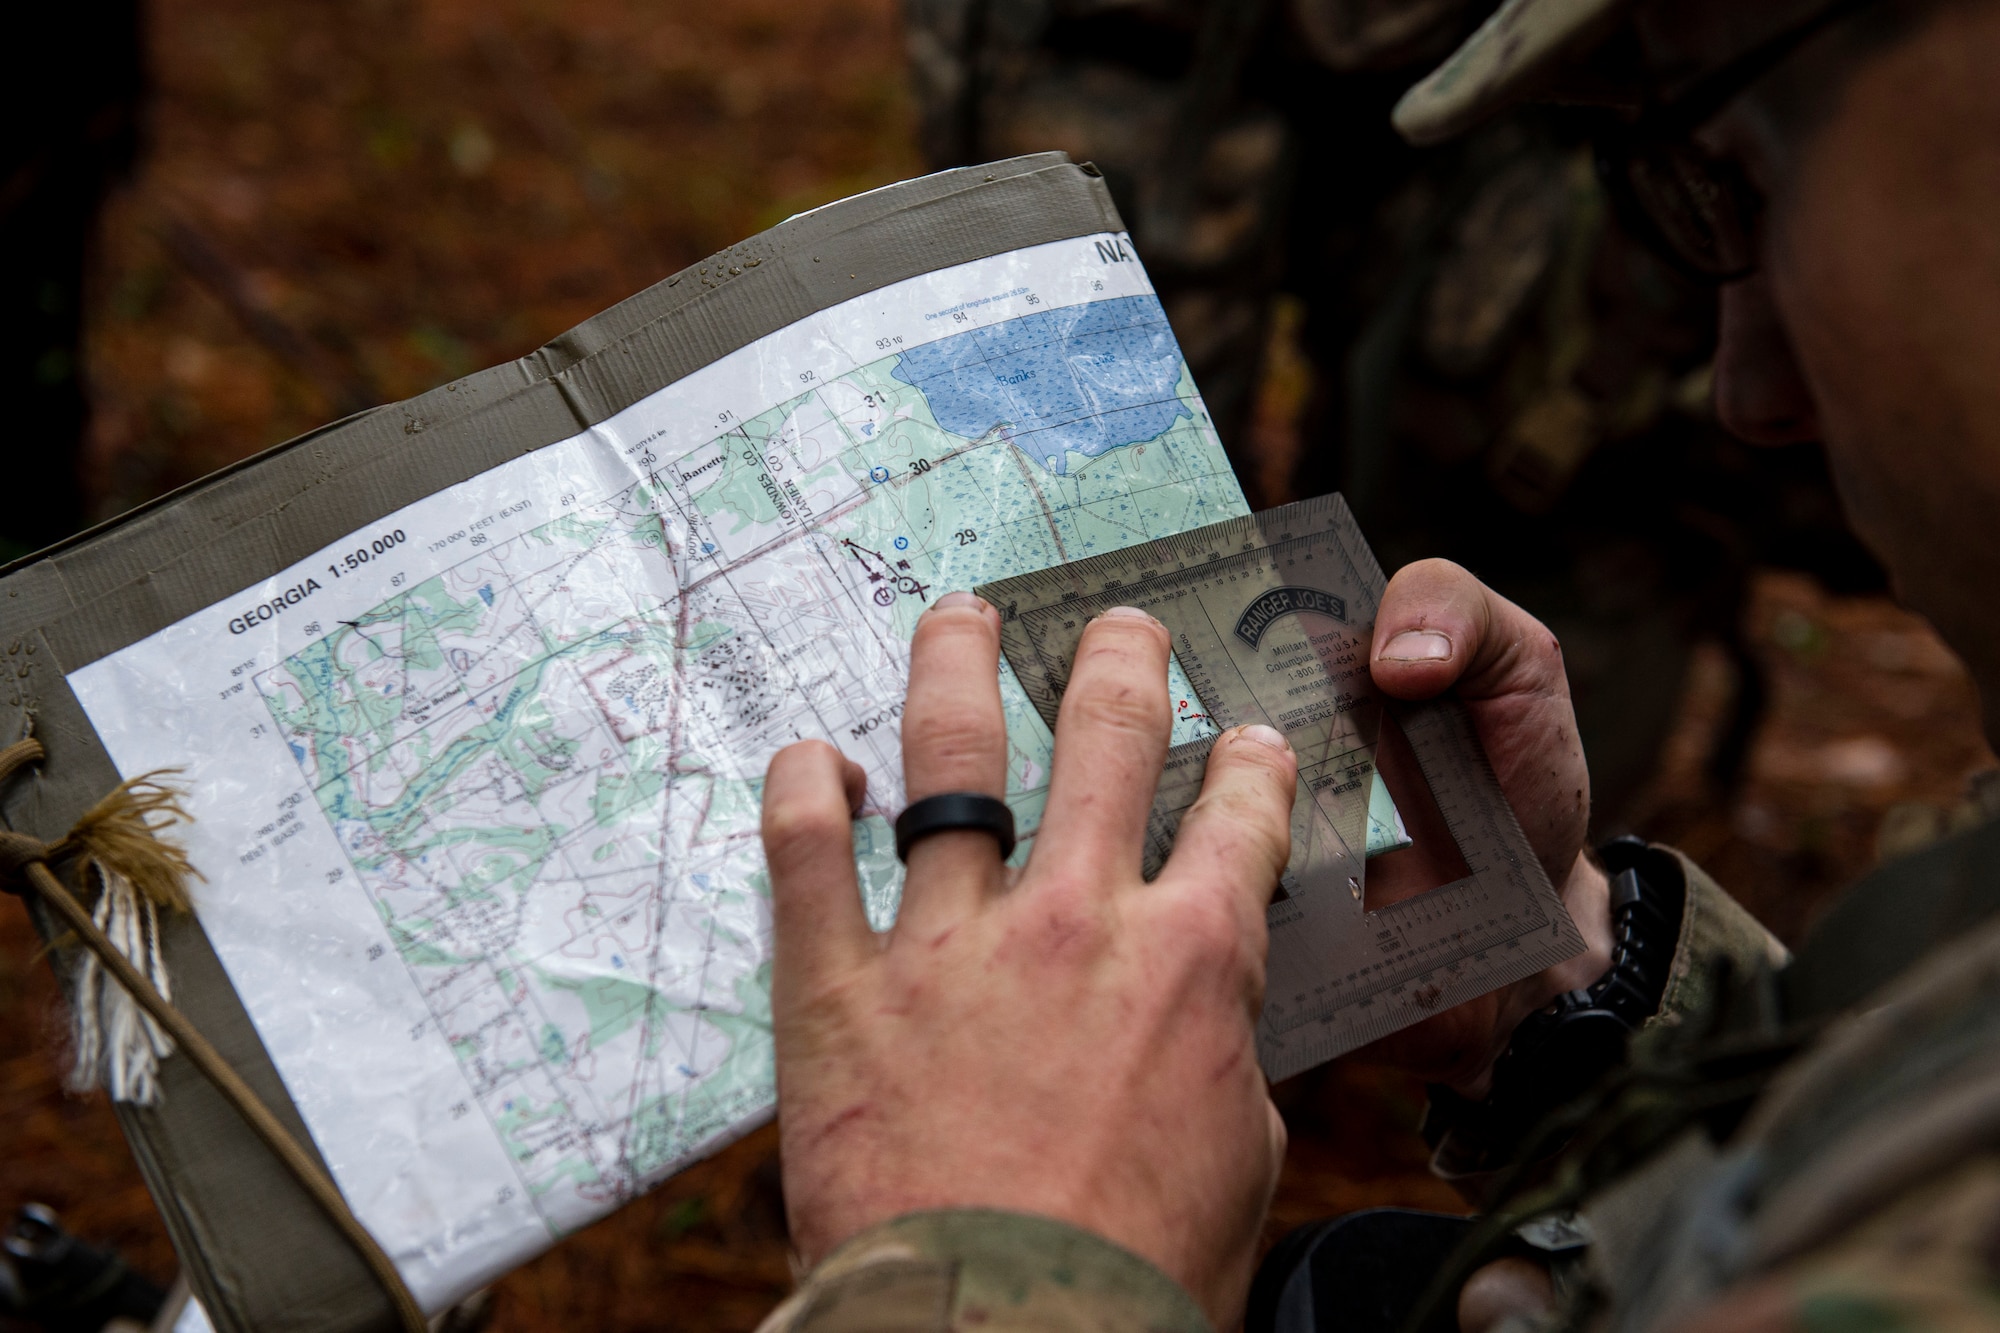 Airman 1st Class Dennis Hannas, an Air Force Ranger Assessment Course student, uses a protractor to pinpoint his location Nov. 15, 2019, at Moody Air Force Base, Ga. The course teaches students critical tasks such as land navigation, troop movements and shooting and maintaining weapons. Over the course of 19 days, the Ranger Assessment Course evaluates students to determine if they possess the knowledge, willpower and skill to attend Army Ranger School. (U.S. Air Force photo by Airman Azaria E. Foster)